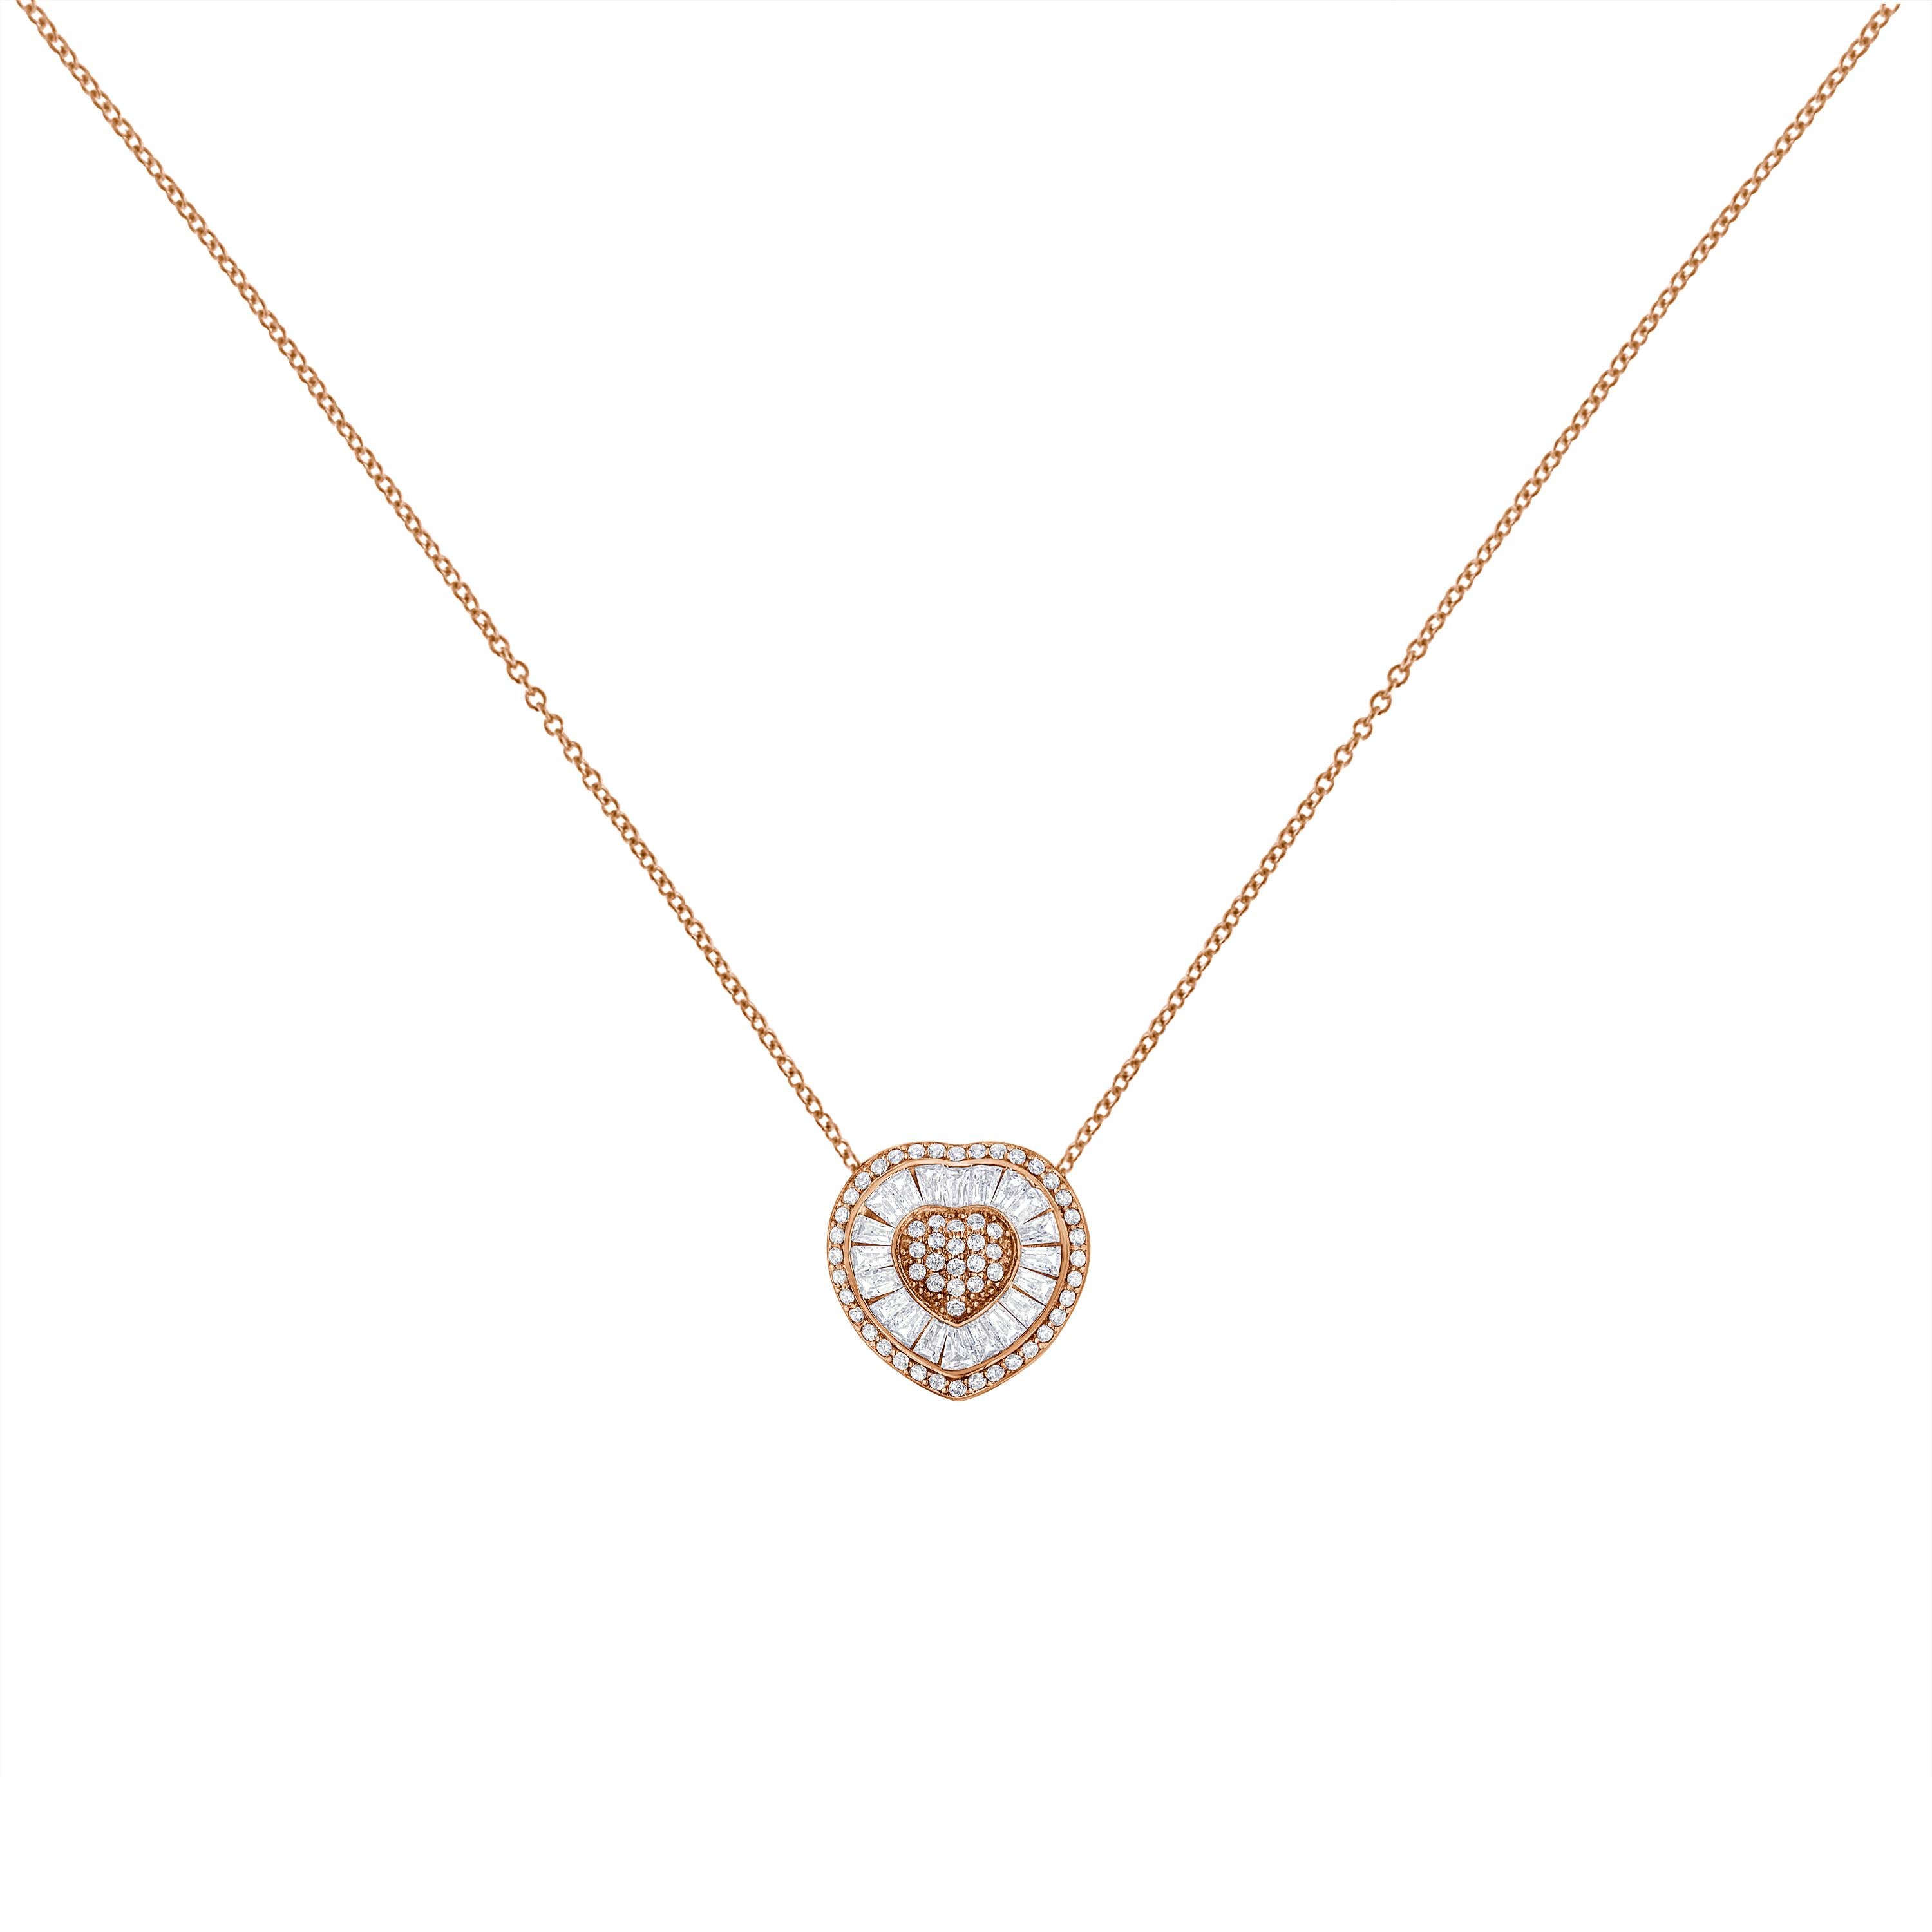 A gold and diamond heart shaped pendant. This necklace is made with 31 round and 21 baguette cut diamonds, weighing a total of 1/2 ct. The diamonds are set in lustrous 10k rose gold. It comes with a box chain.

'Video Available Upon